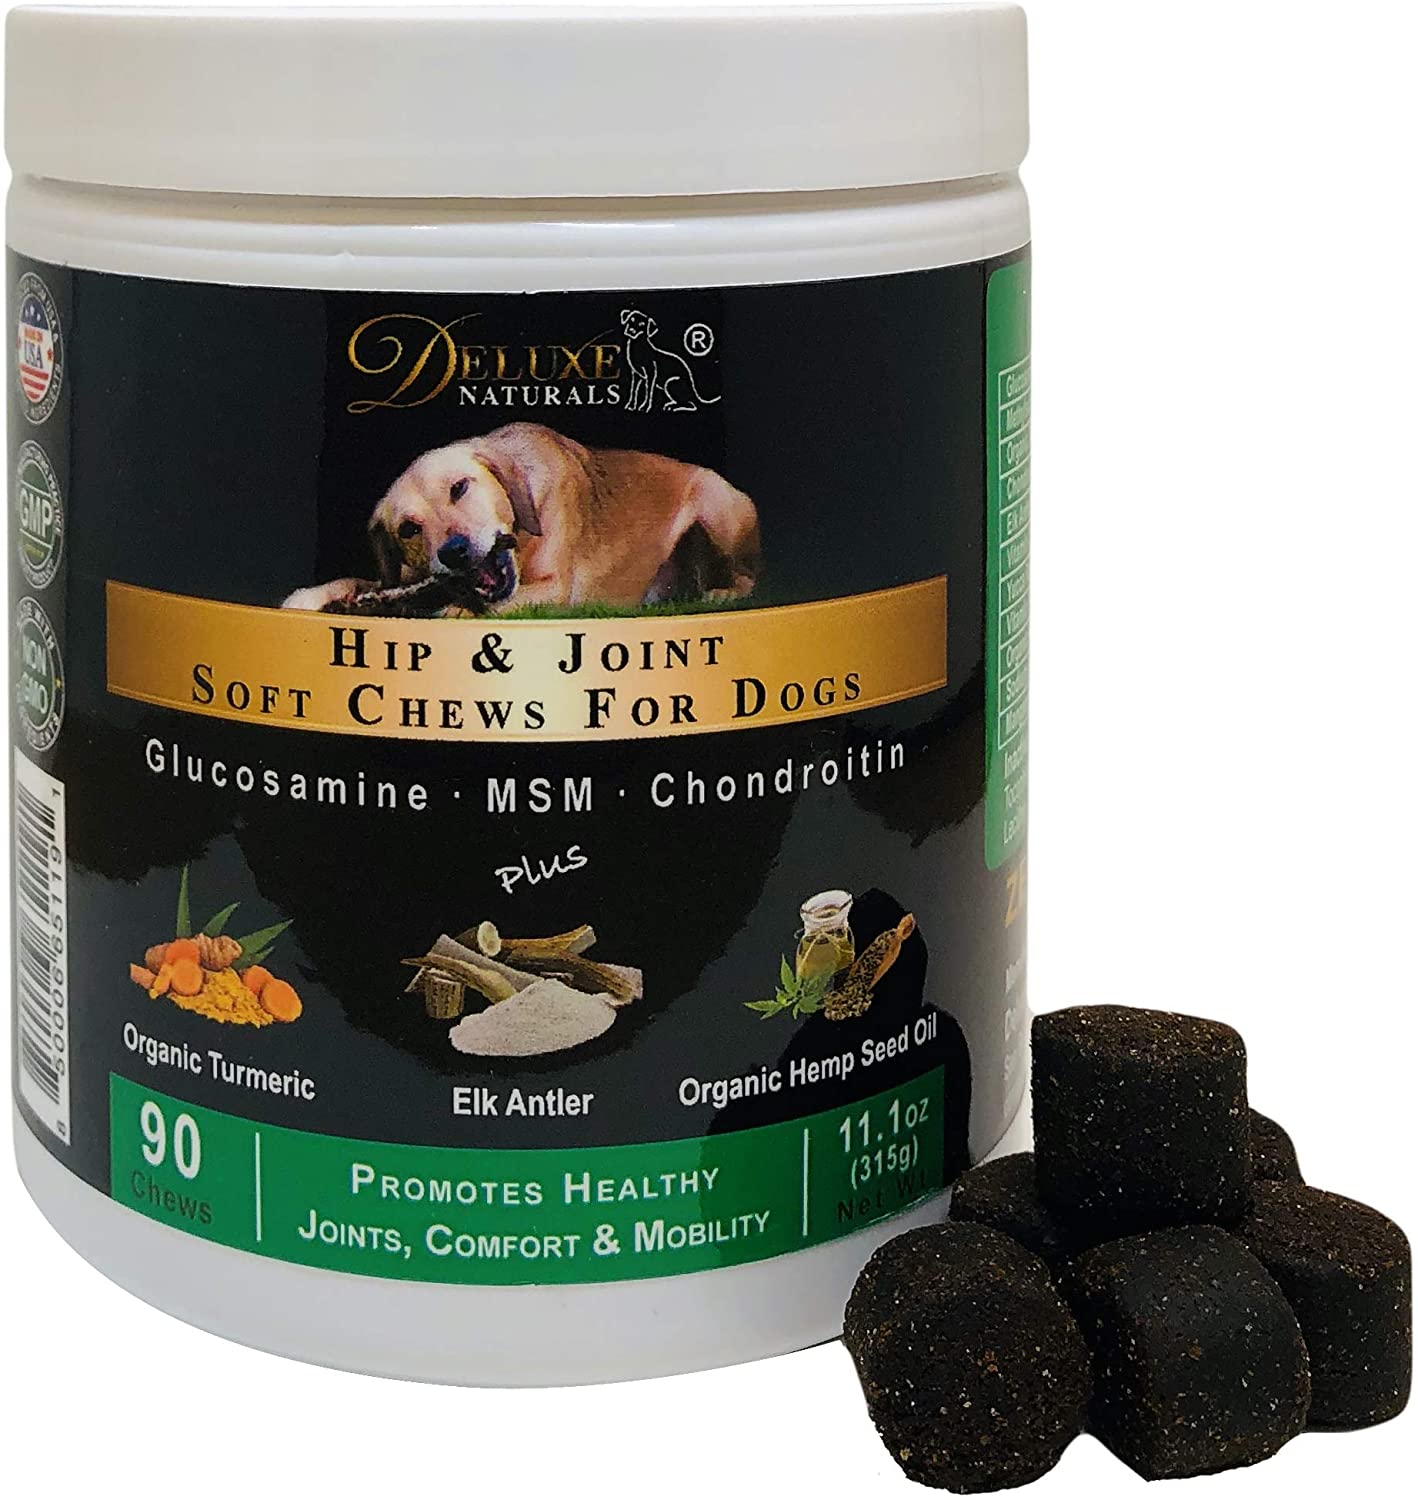 Deluxe Naturals Unique Elk Antler Flavor Glucosamine for Dogs, Advanced Dog Hip and Joint Soft Chews